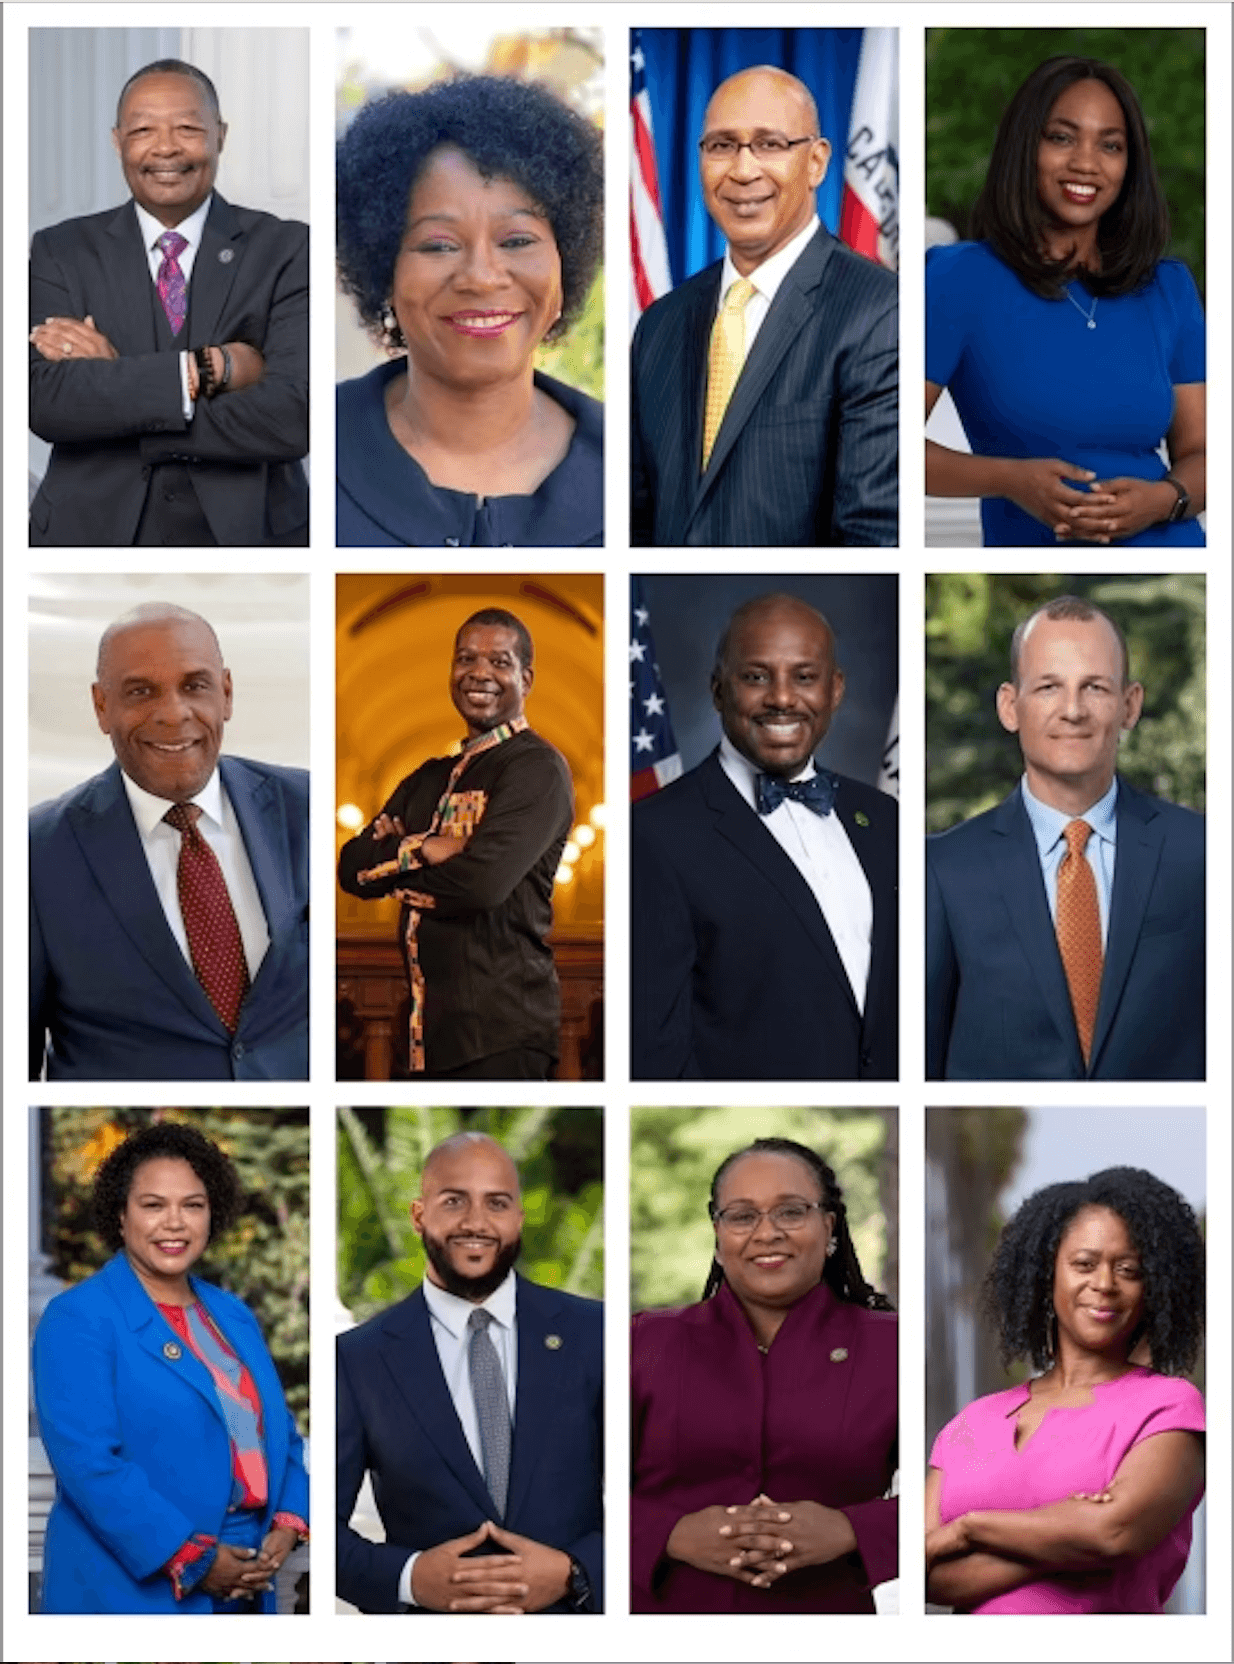 Leading With Lawmaking: Six Questions for the California Legislative Black Caucus